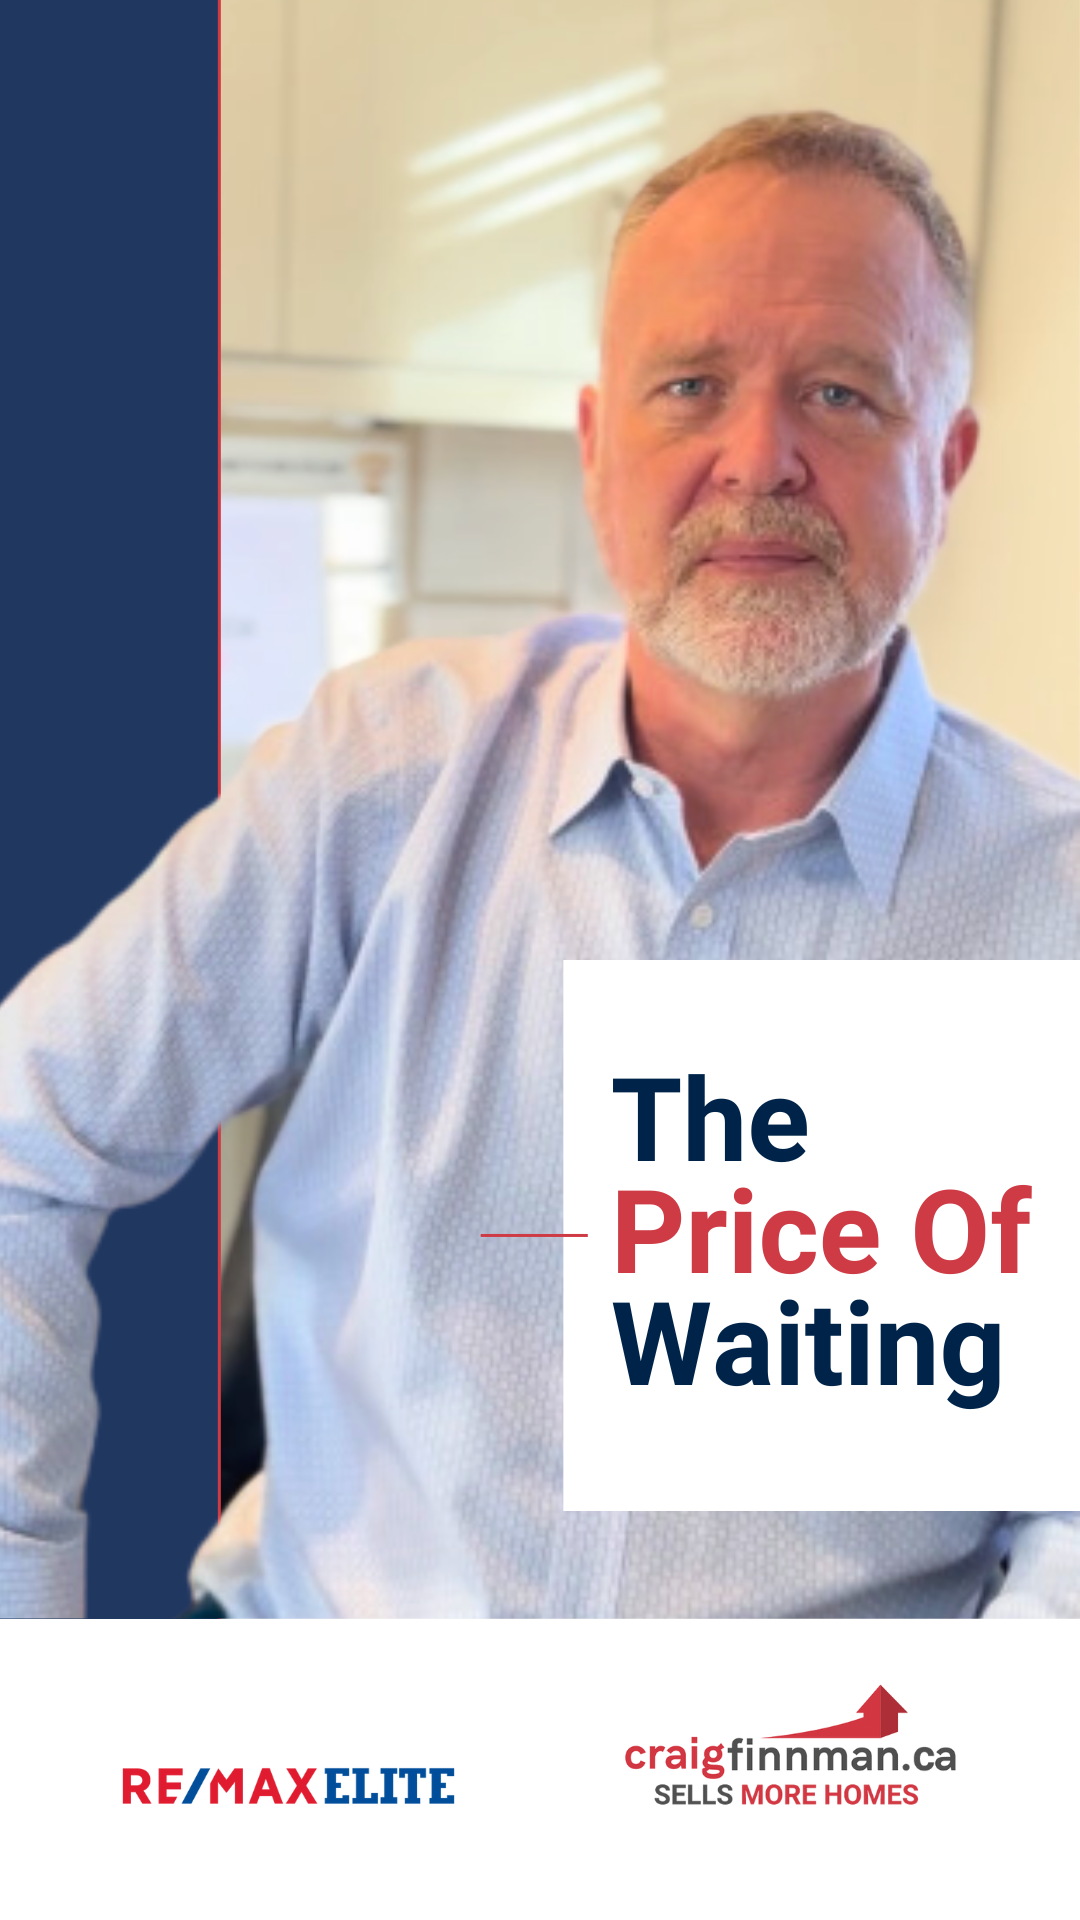 The Price of Waiting